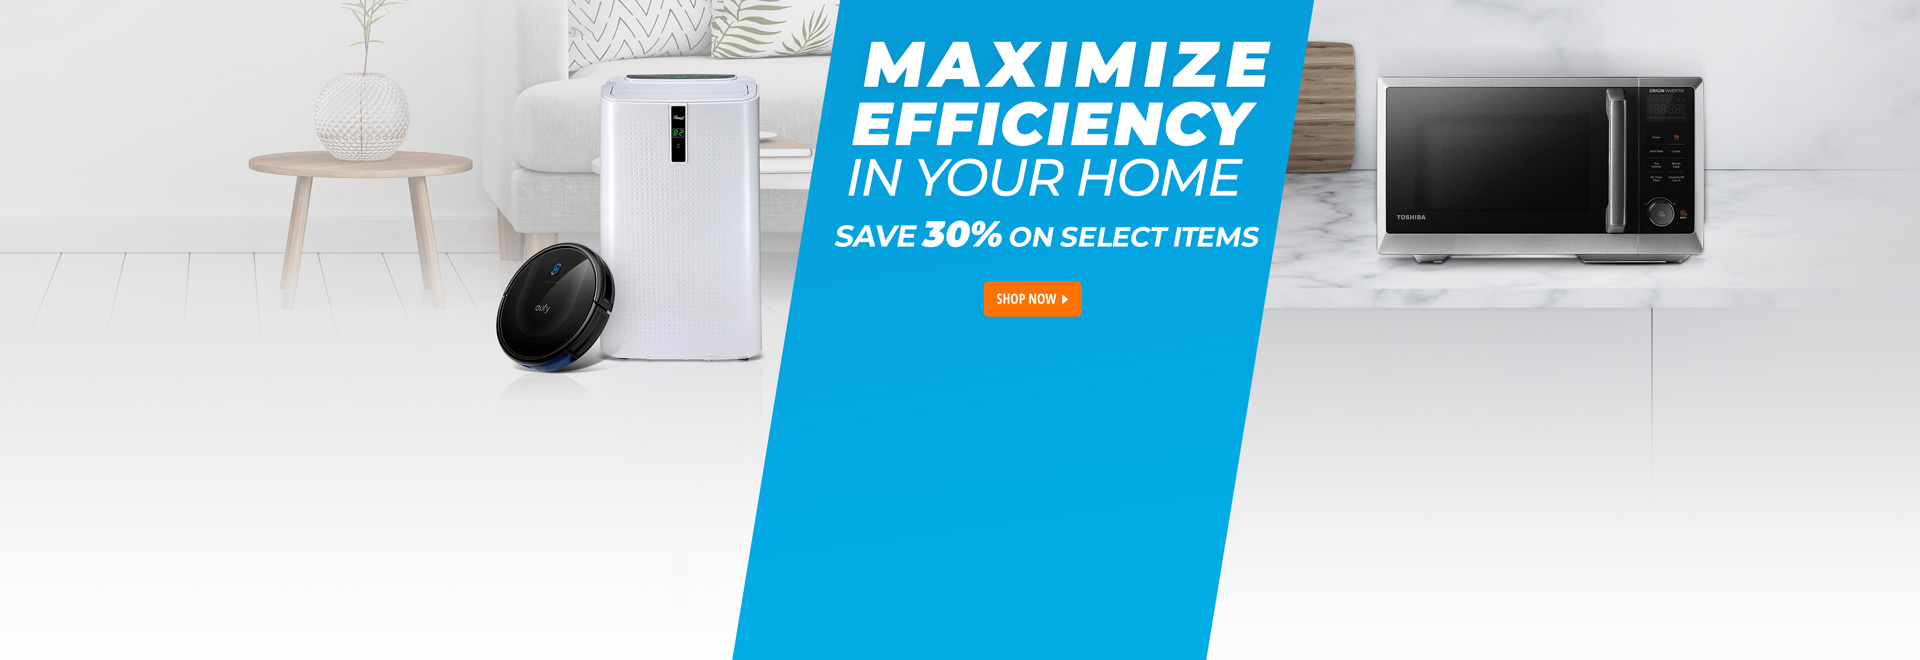 Maximize Efficiency in Your Home